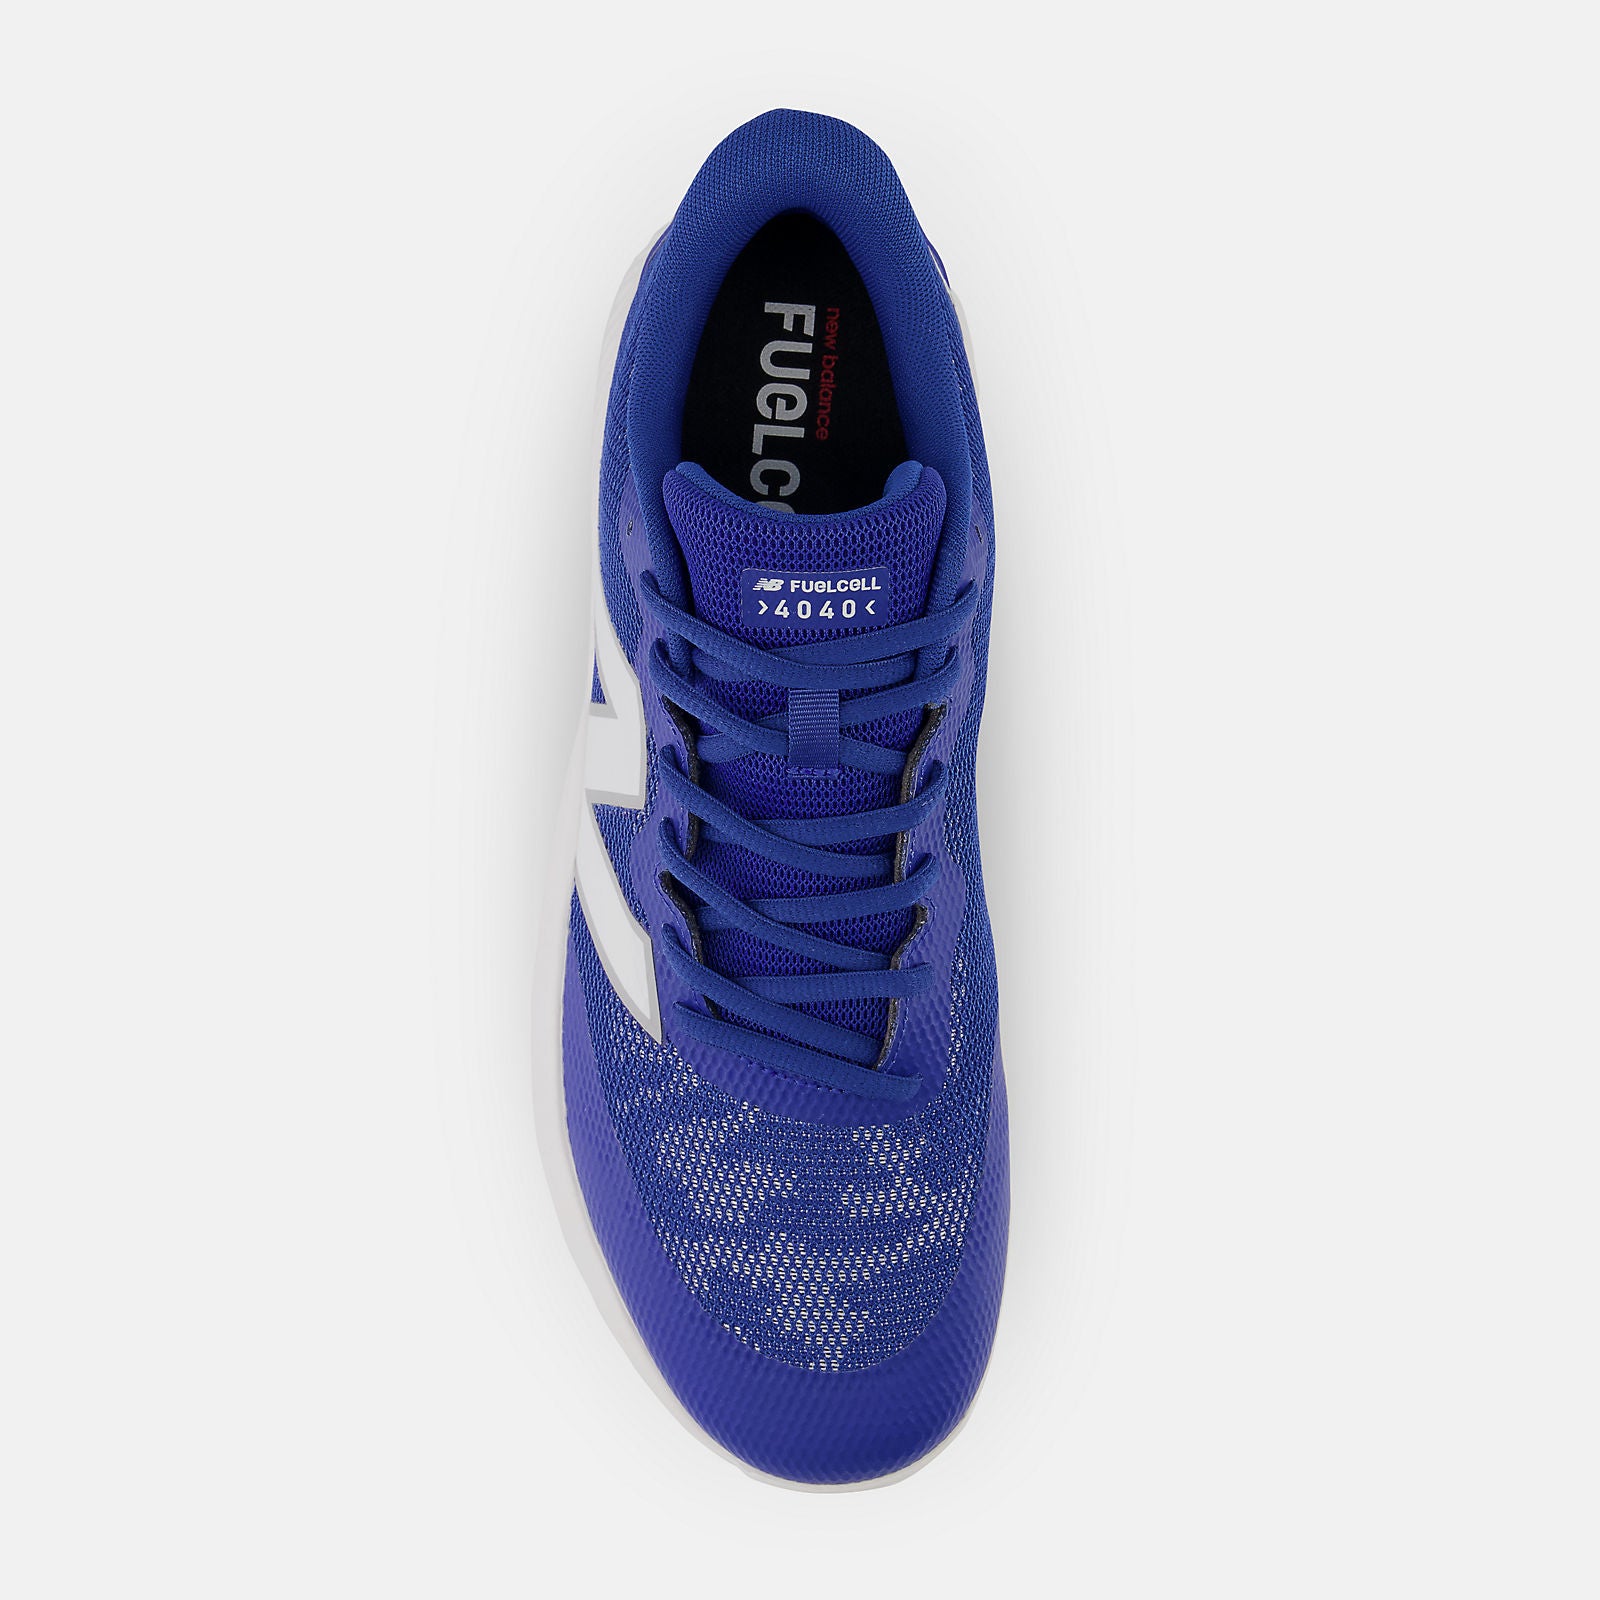 New Balance FuelCell 4040v7 Turf Trainer: Team Royal